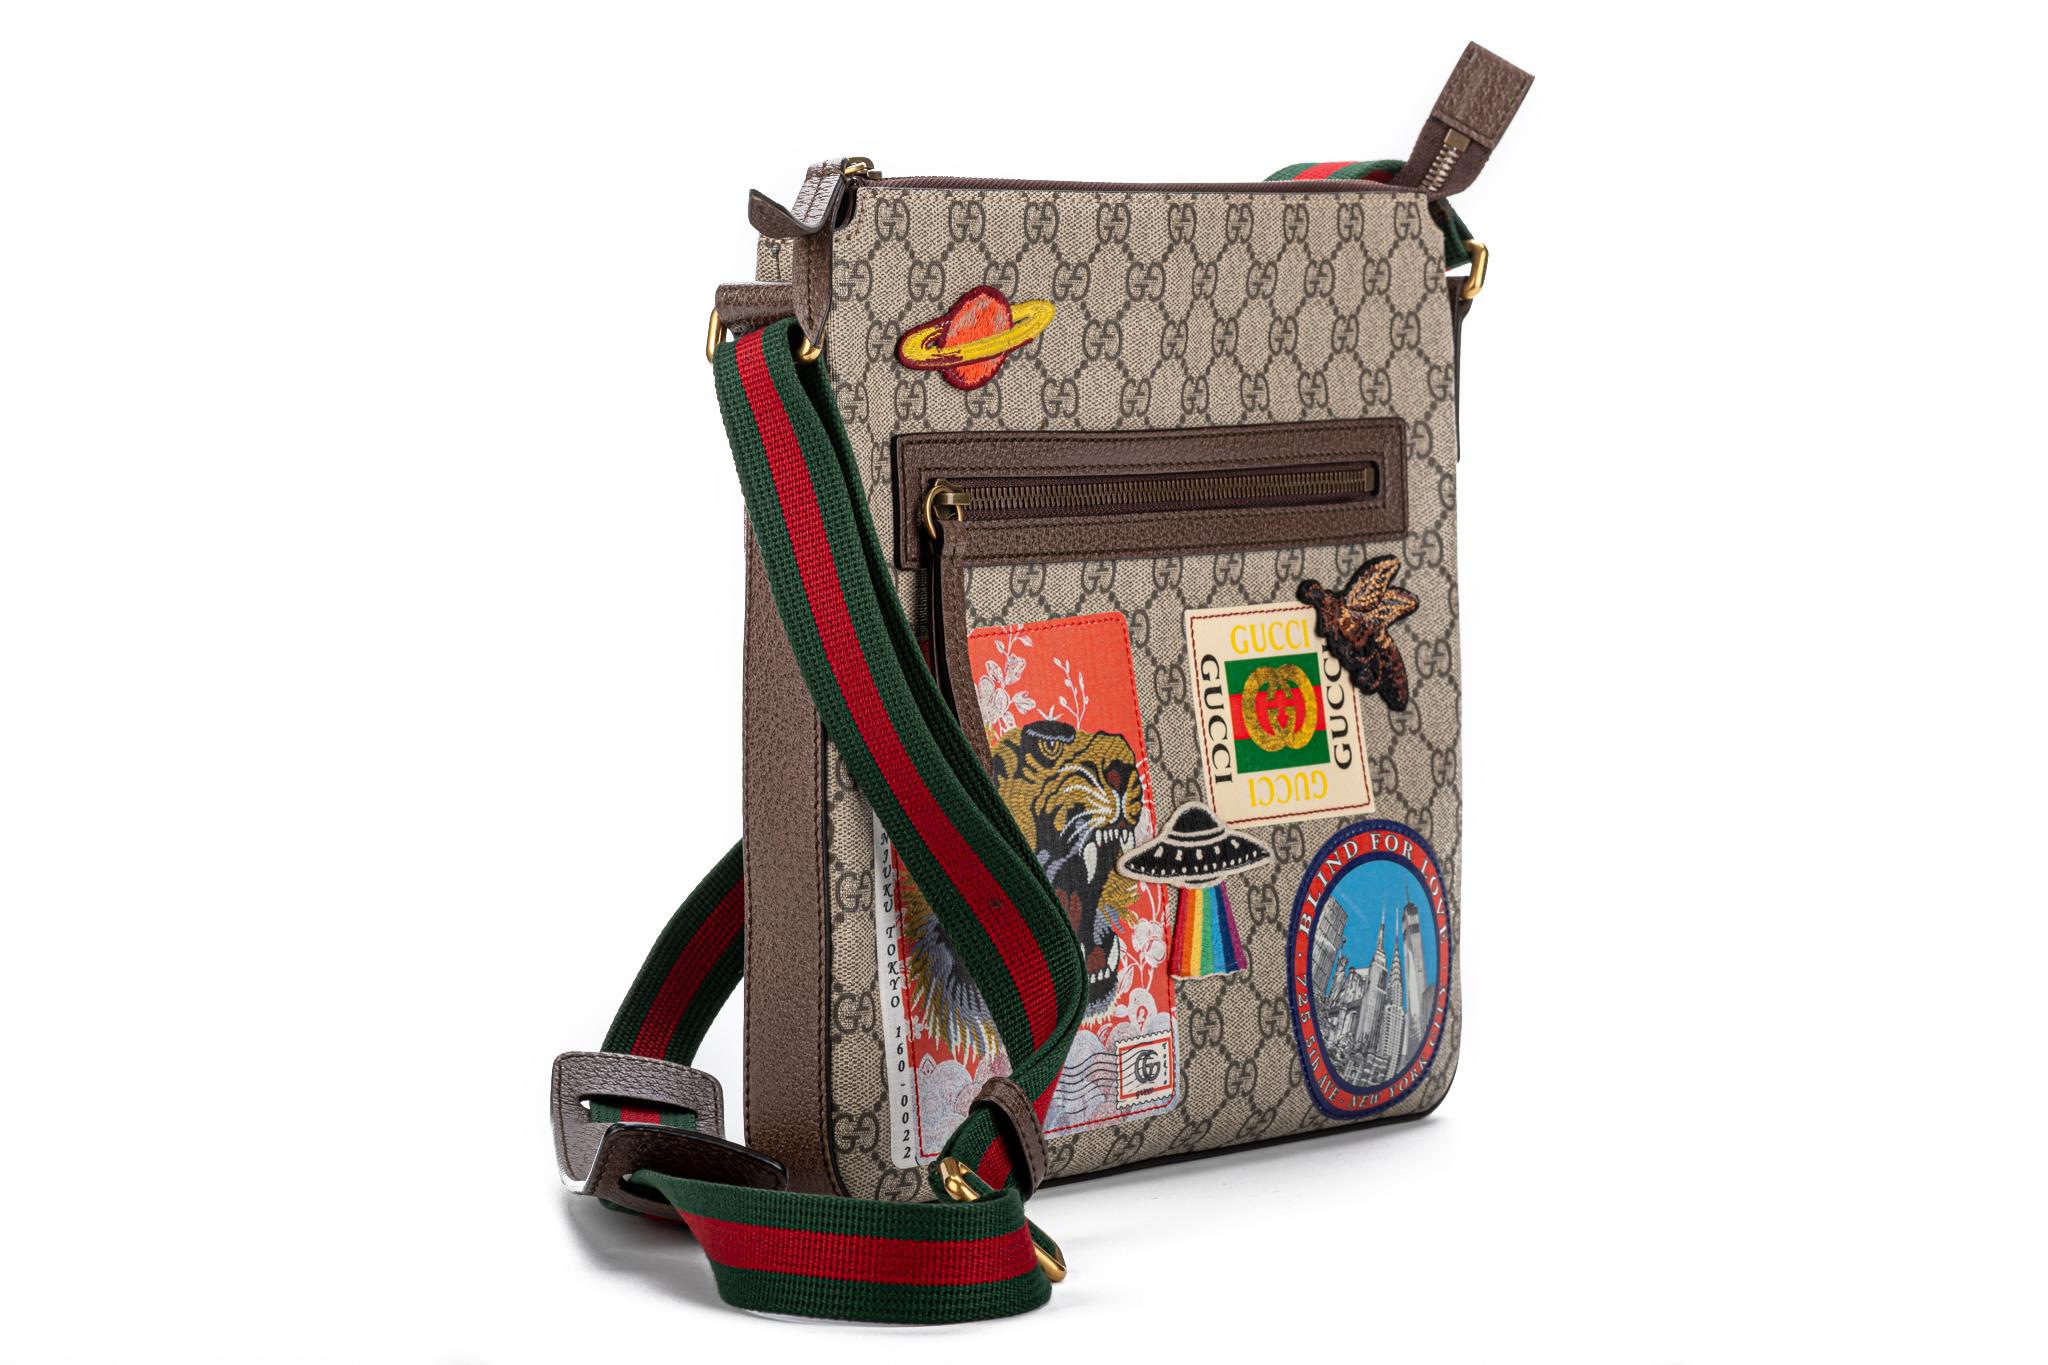 Gucci travel stickers crossbody bag with coated canvas gg logo pattern. Limited edition. Comes with tags and original dust cover.